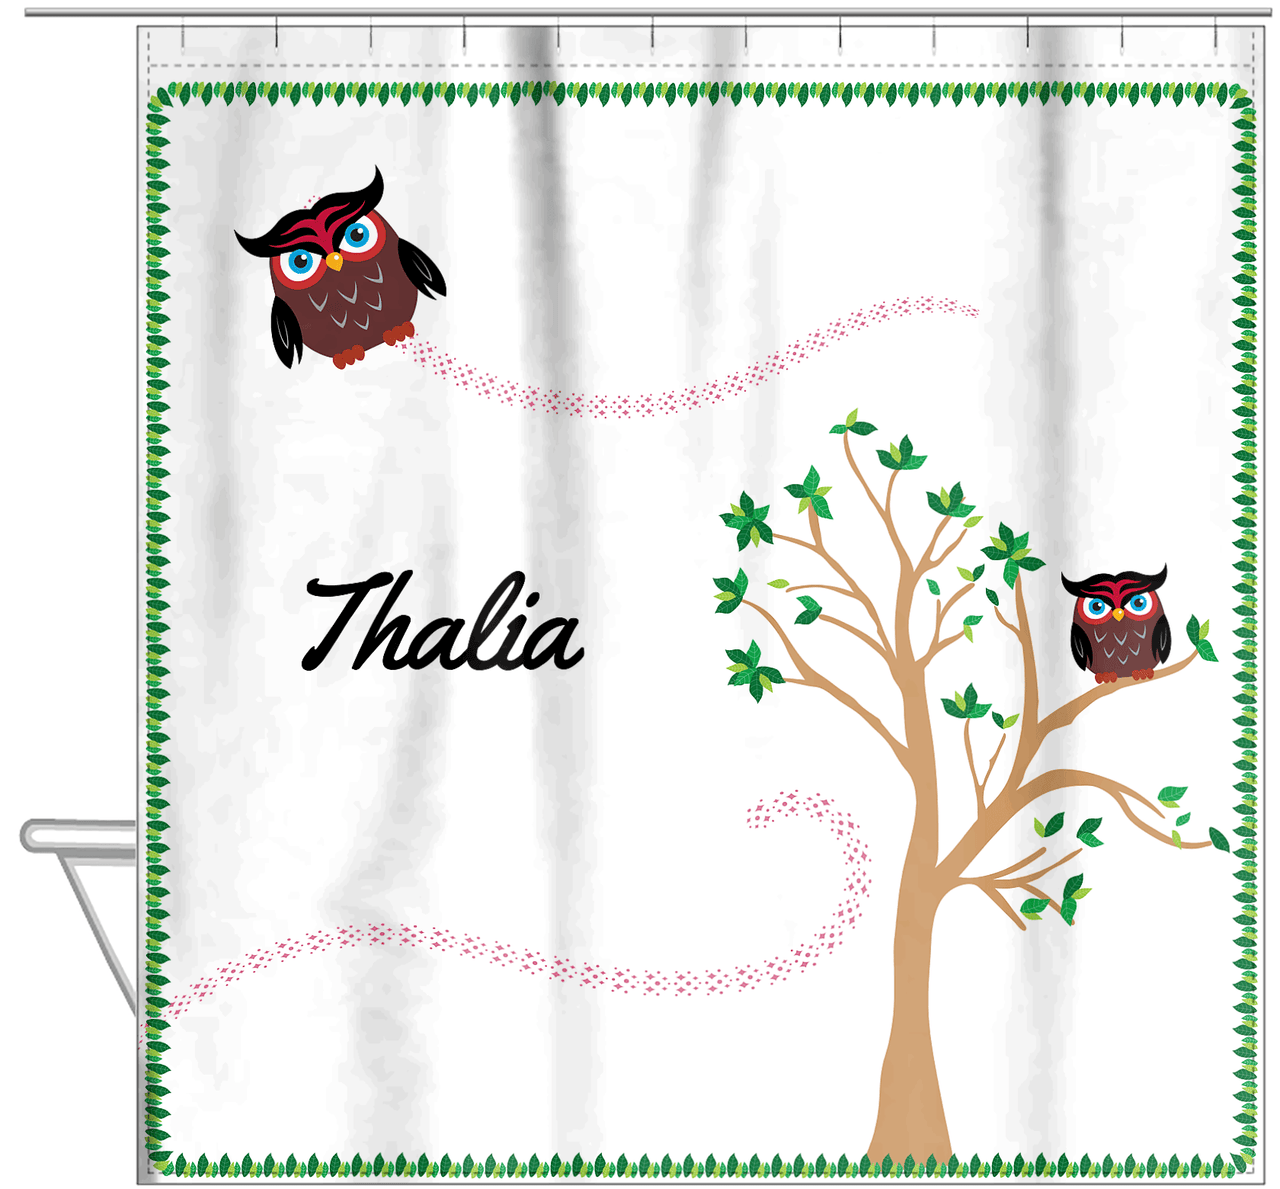 Personalized Owl Shower Curtain VII - Owl 02 - White Background - Hanging View